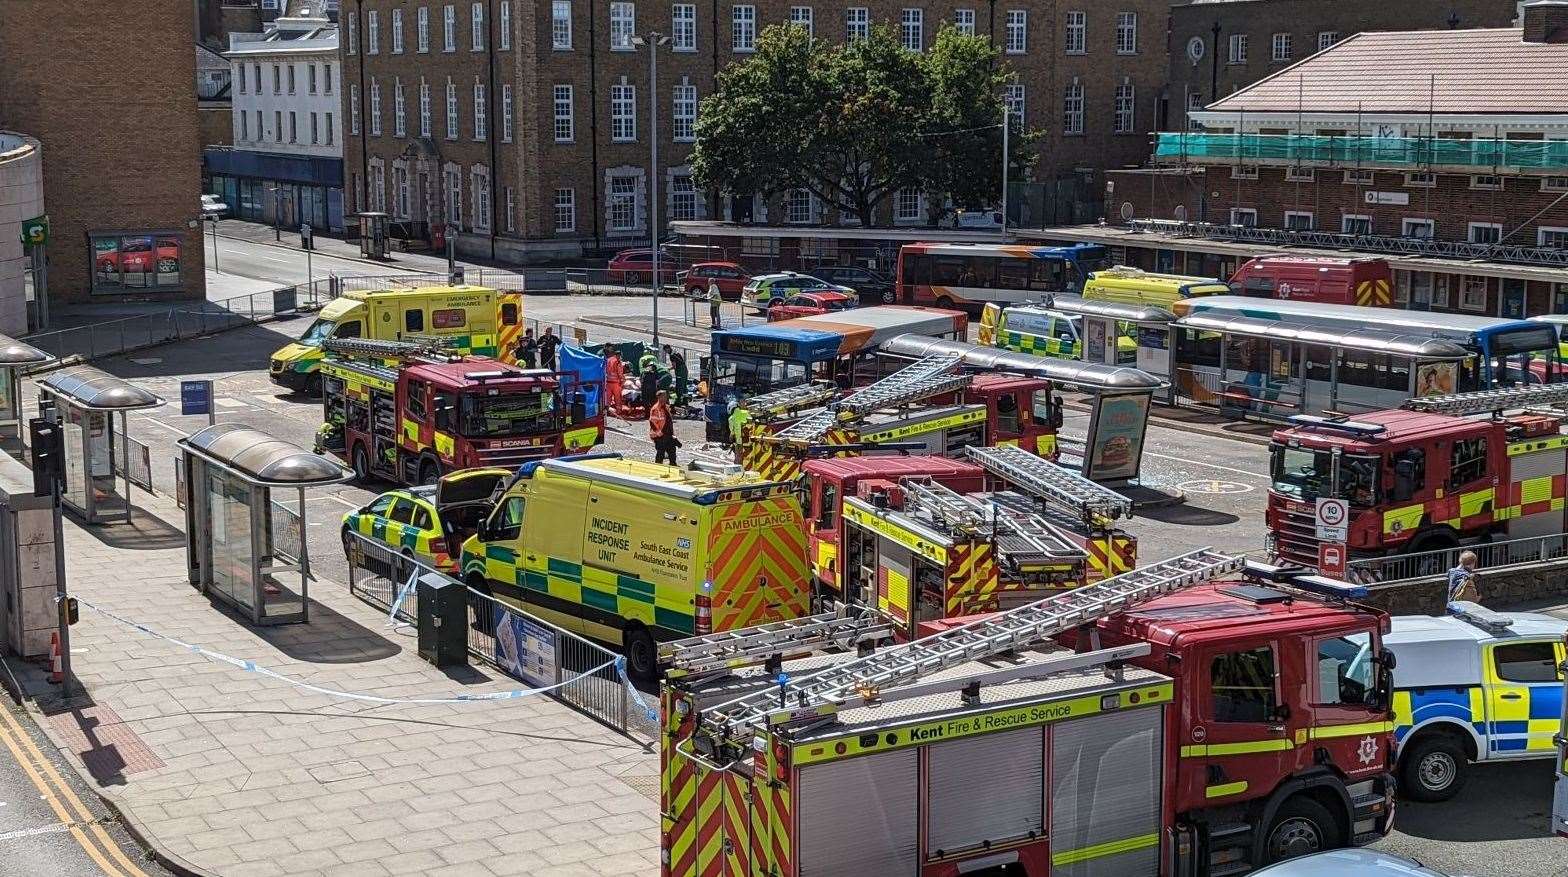 Emergency services at the scene of the incident at Folkestone bus station last month. Picture: Rhys Griffiths